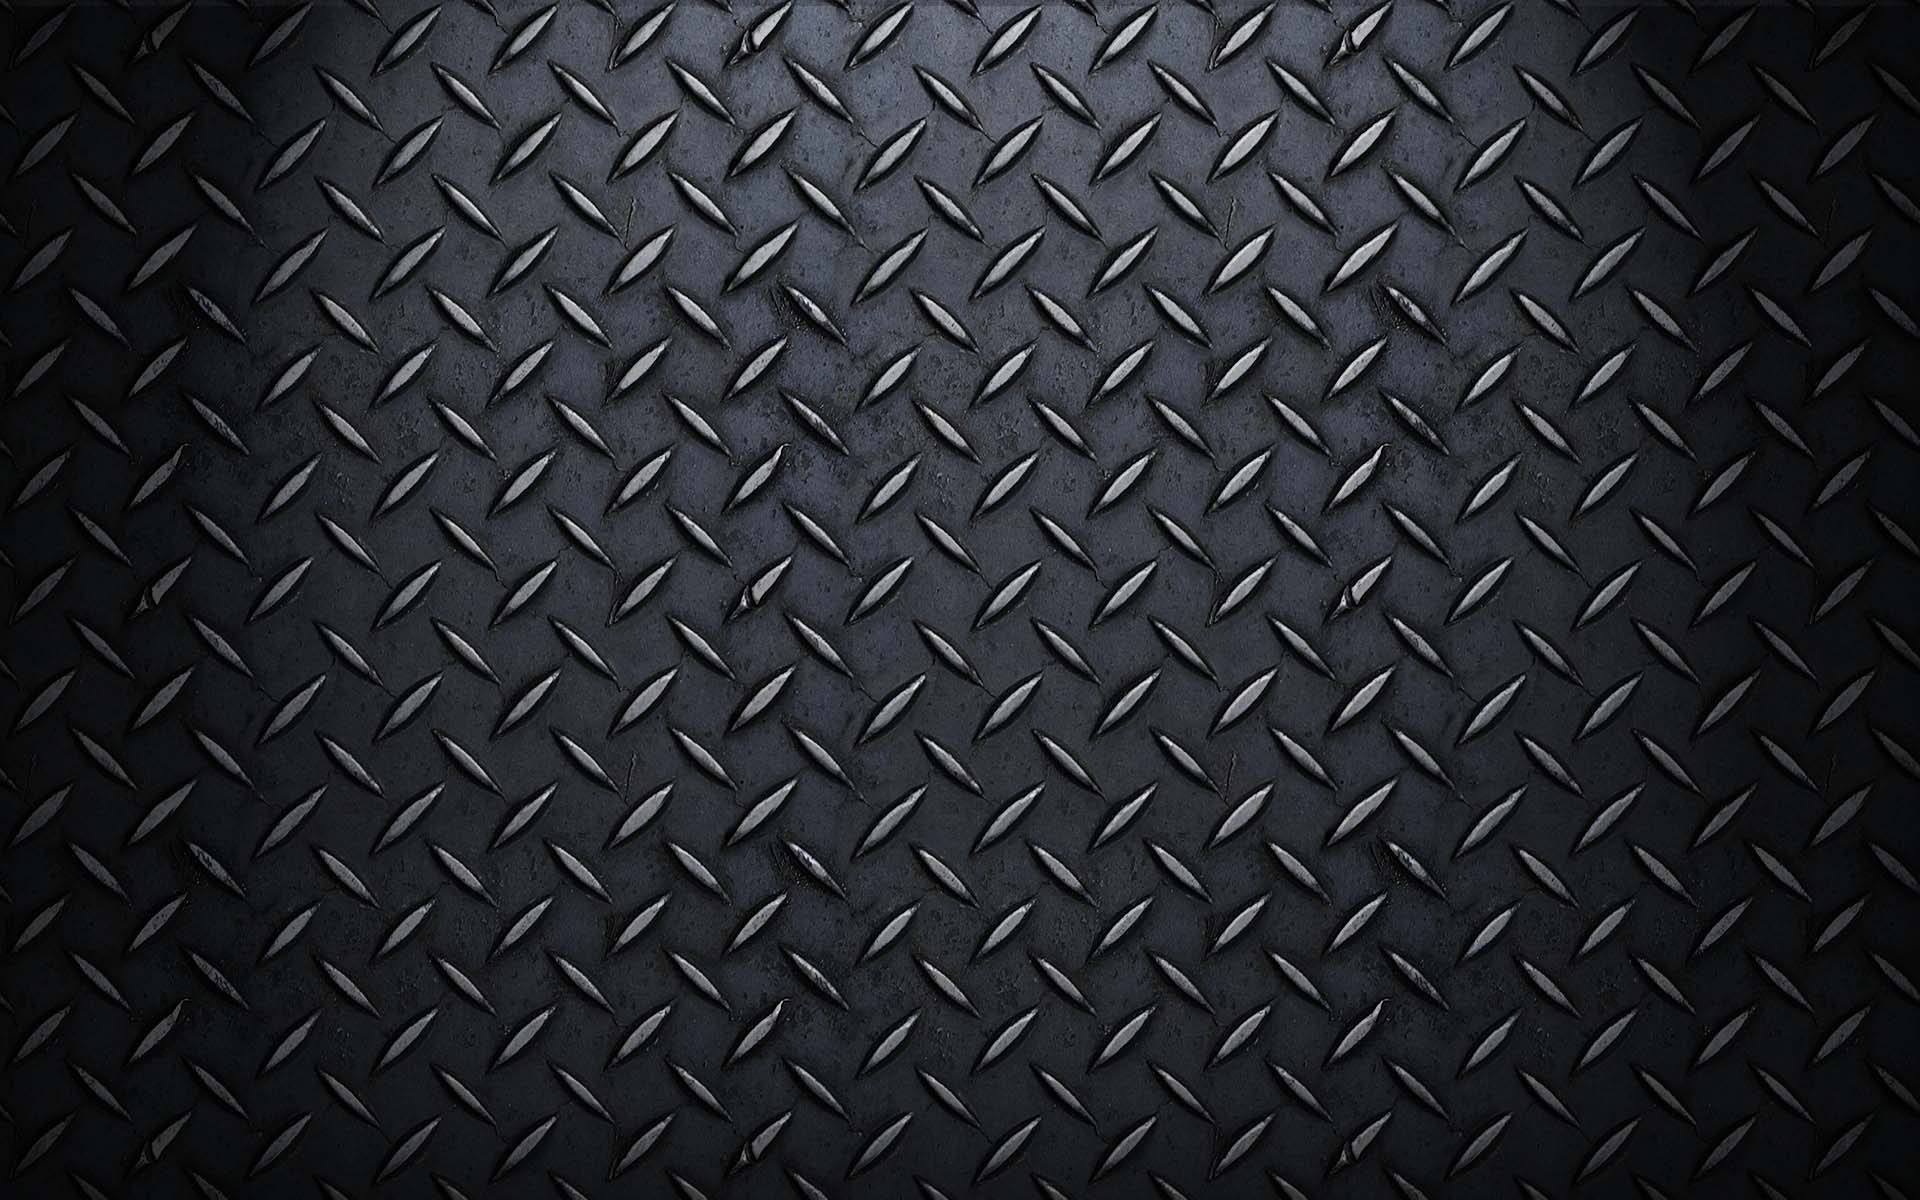 42 HD textured and simple wallpapers for your mobile devices